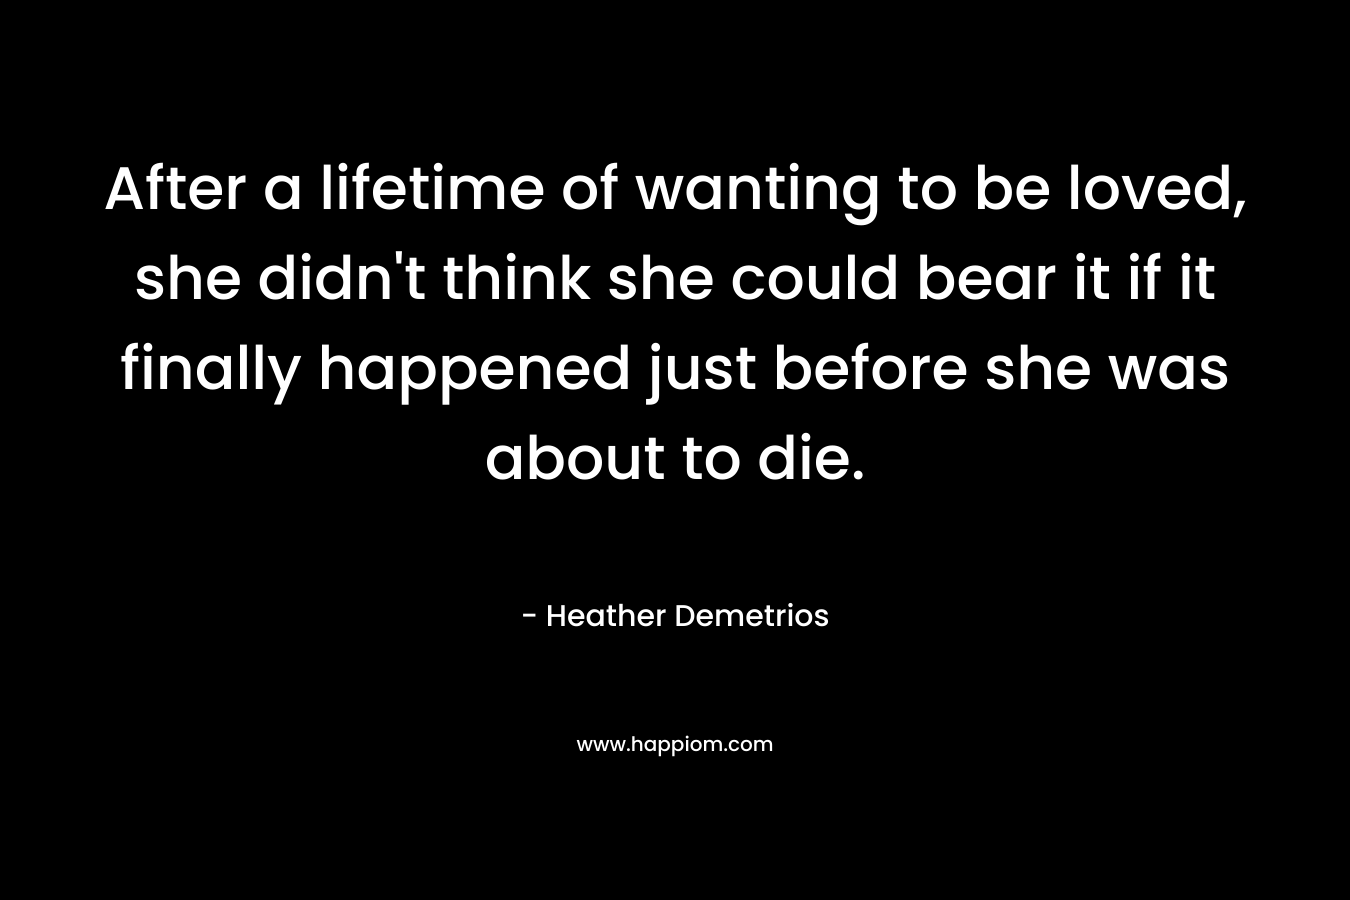 After a lifetime of wanting to be loved, she didn't think she could bear it if it finally happened just before she was about to die.